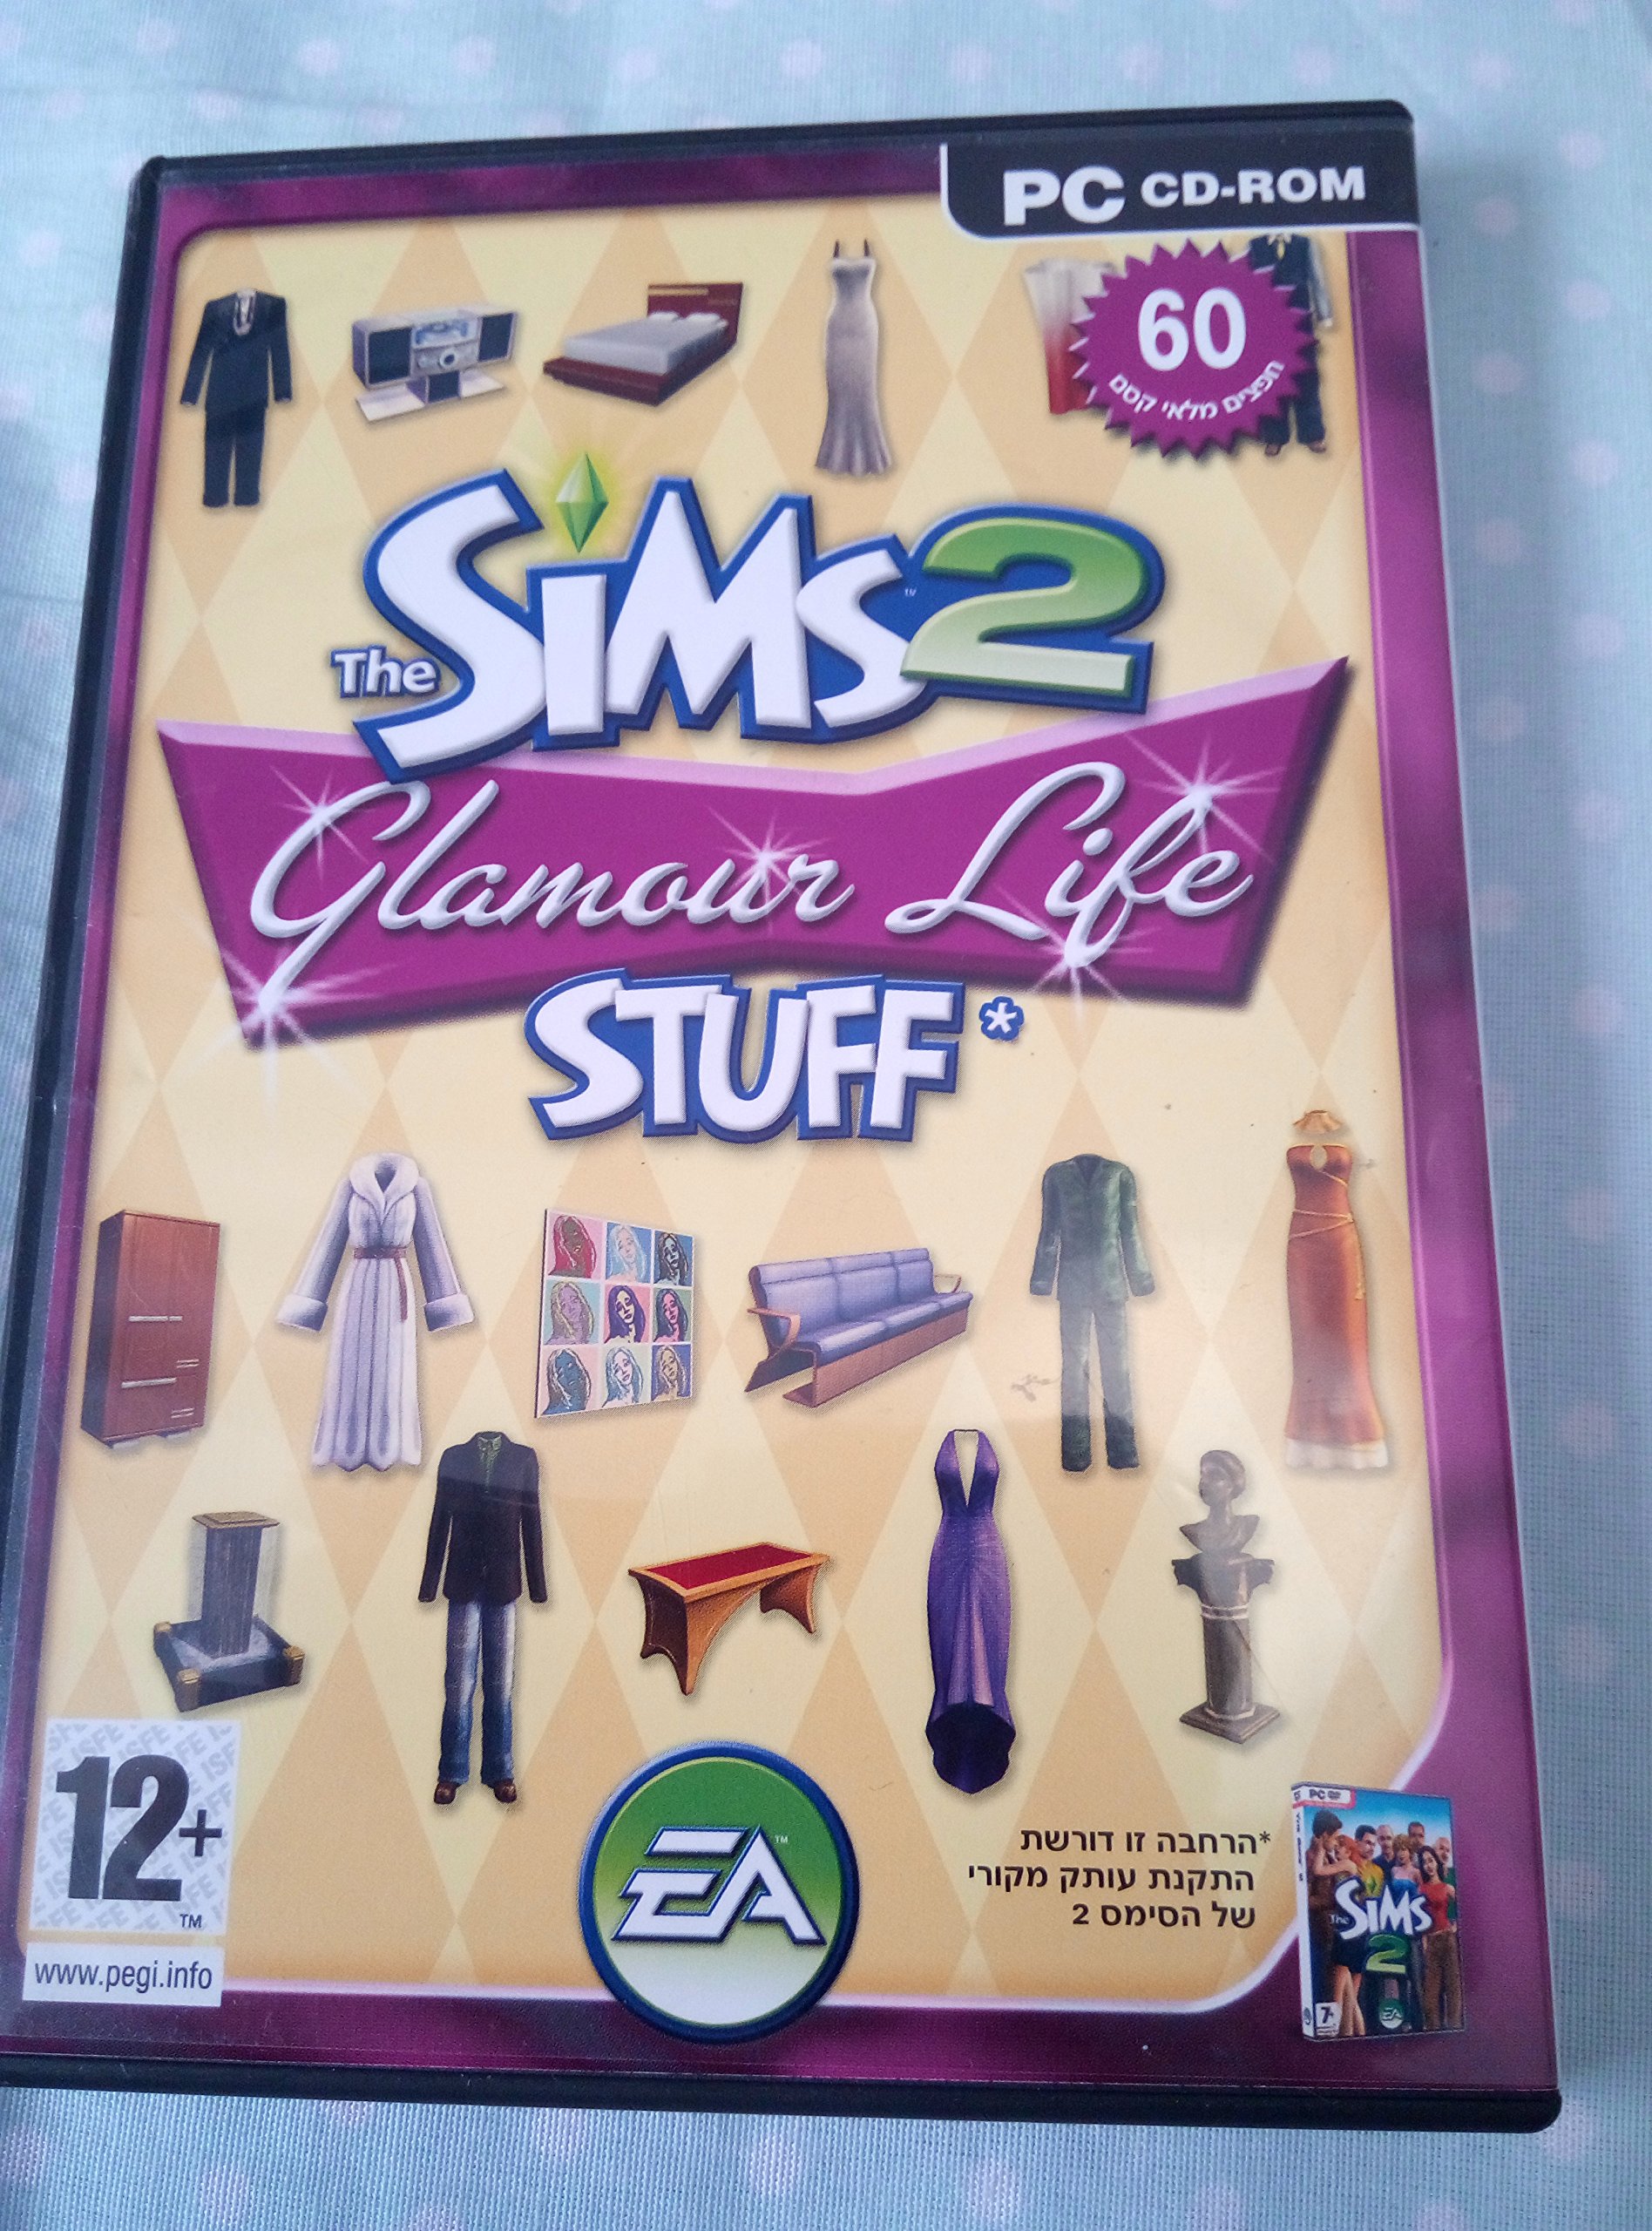 The Sims 2 Glamour Life Stuff - PC